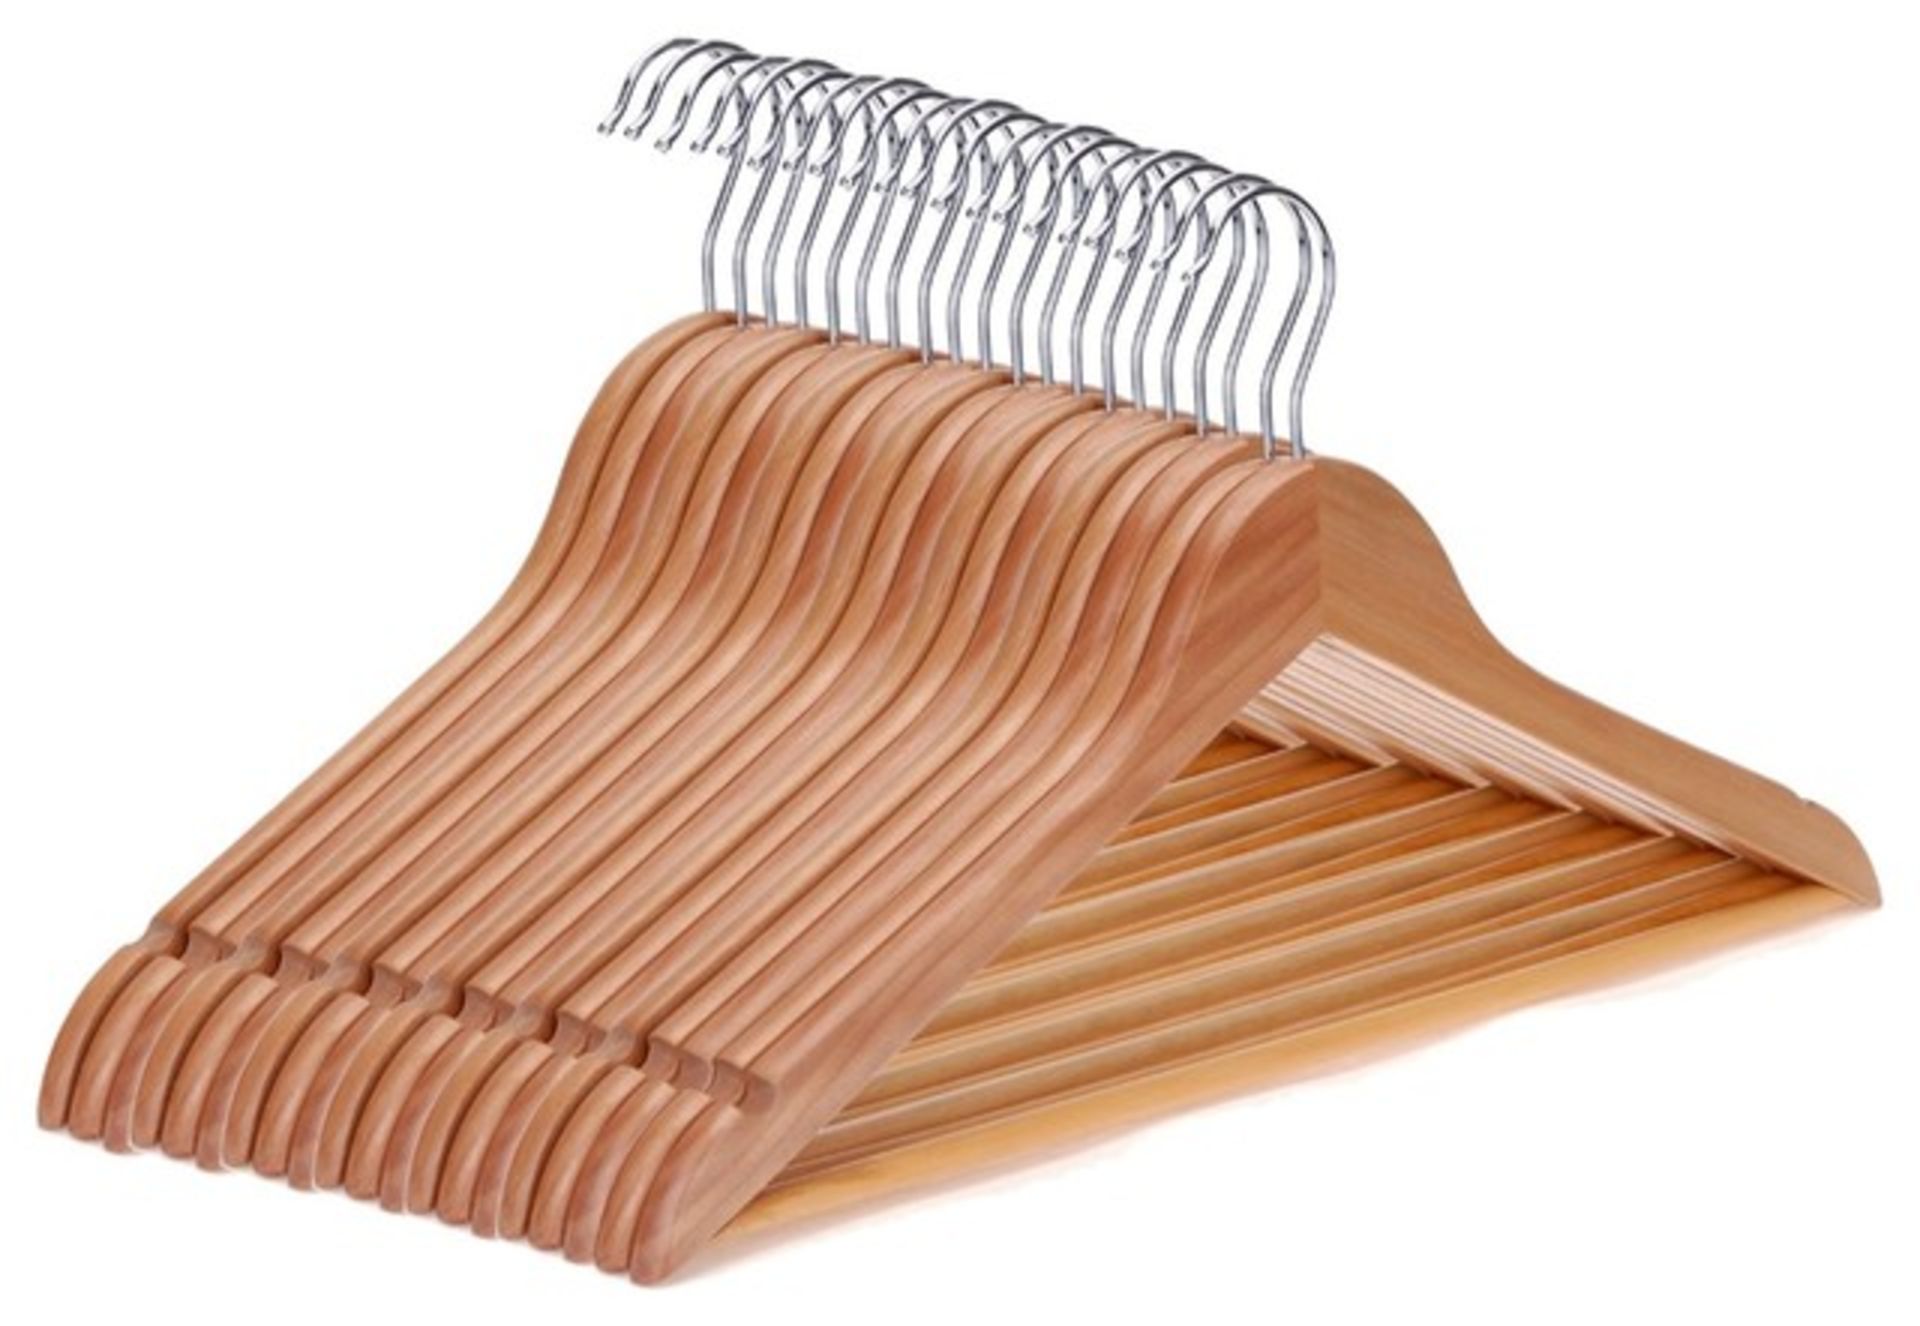 + VAT Brand New Job Lot of 20 Wooden Clothes Hangers - ISP £17.70 (Shop Fitting Warehouse)